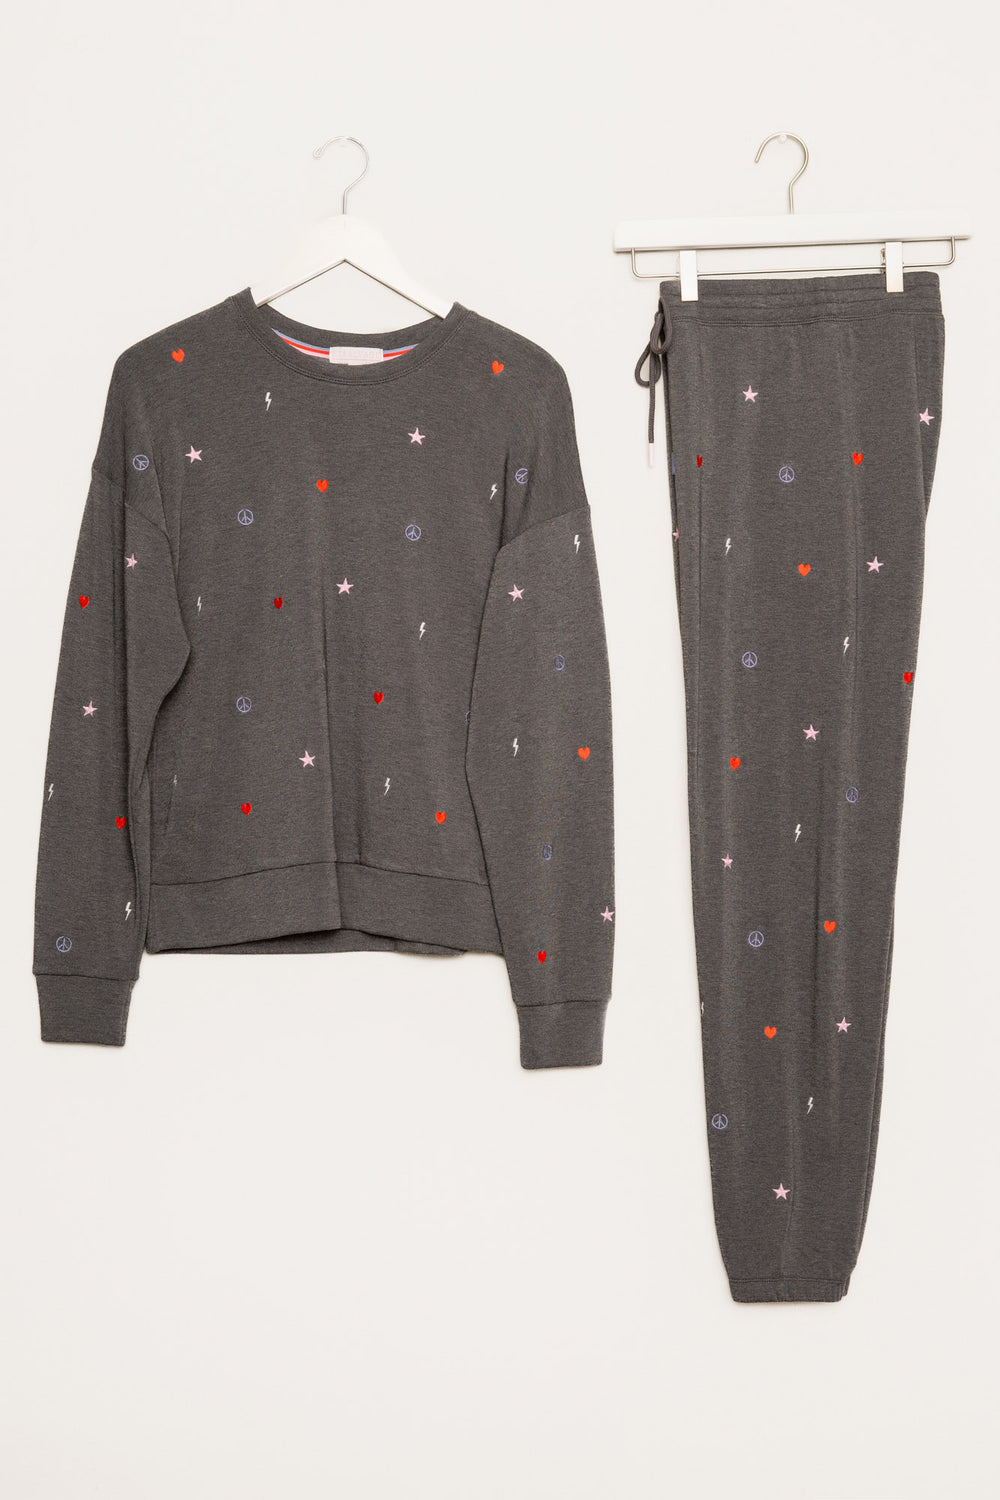 Lounge set top & jogger in dark grey fleece. Mini peace-heart-star all-over embroidered pattern. (7257679888484)